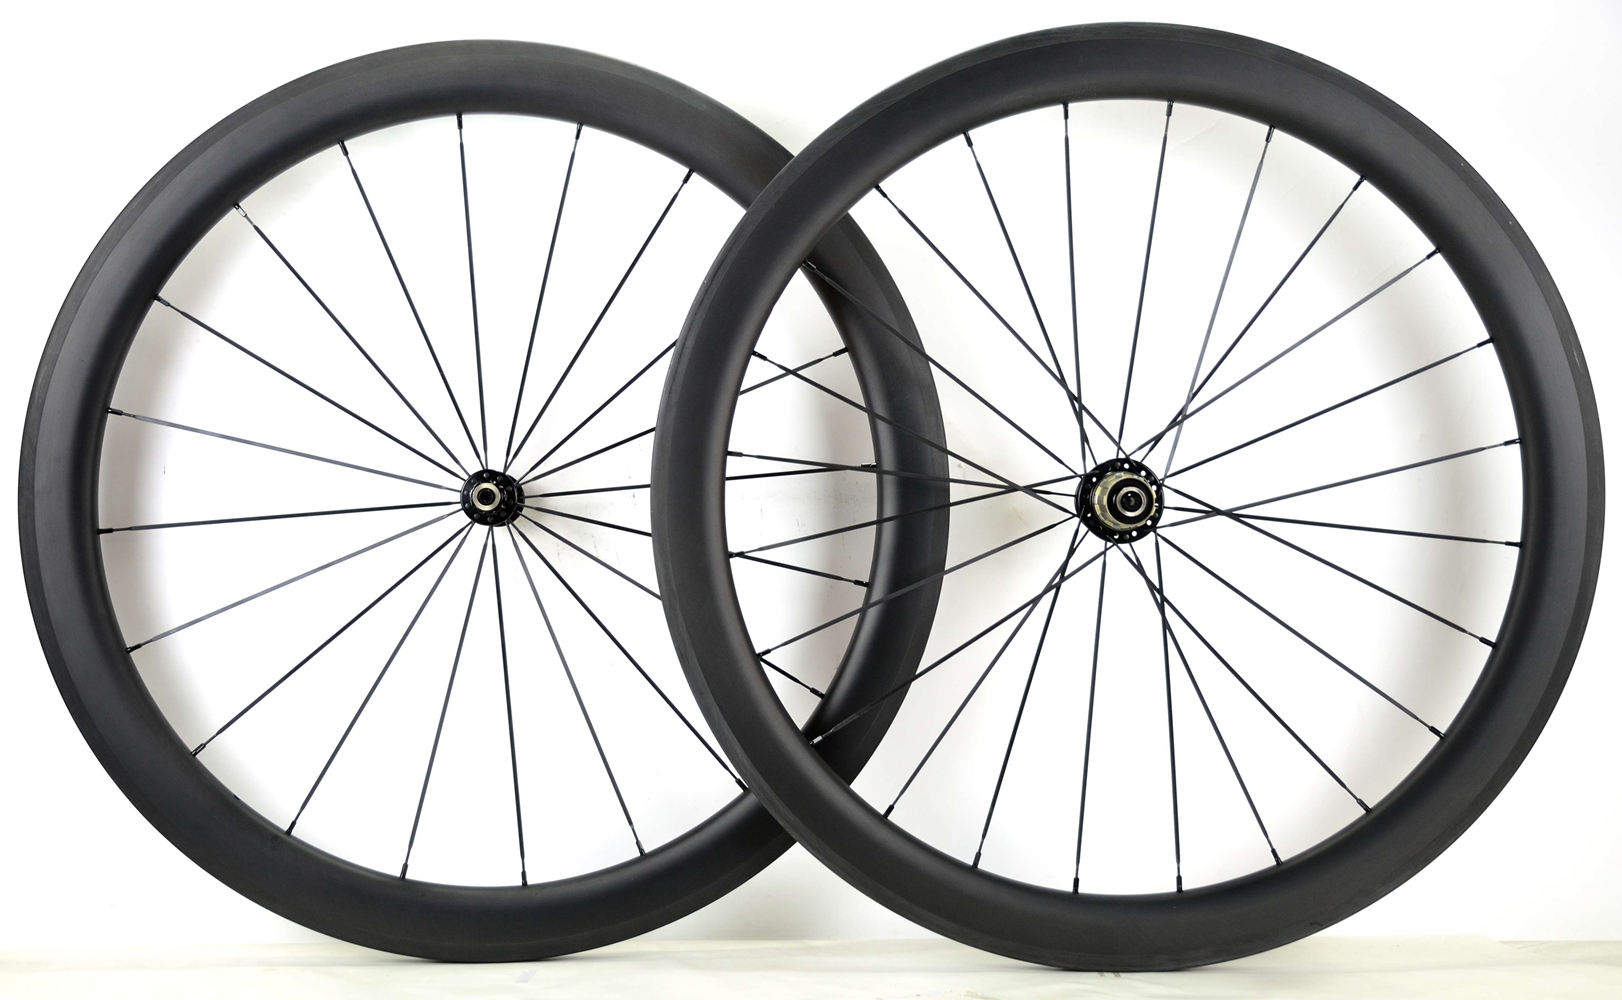 Free shipping 700C 50mm depth road bike carbon wheelset 25mm width clincher carbon wheels with powerway R36 hub UD matte finish